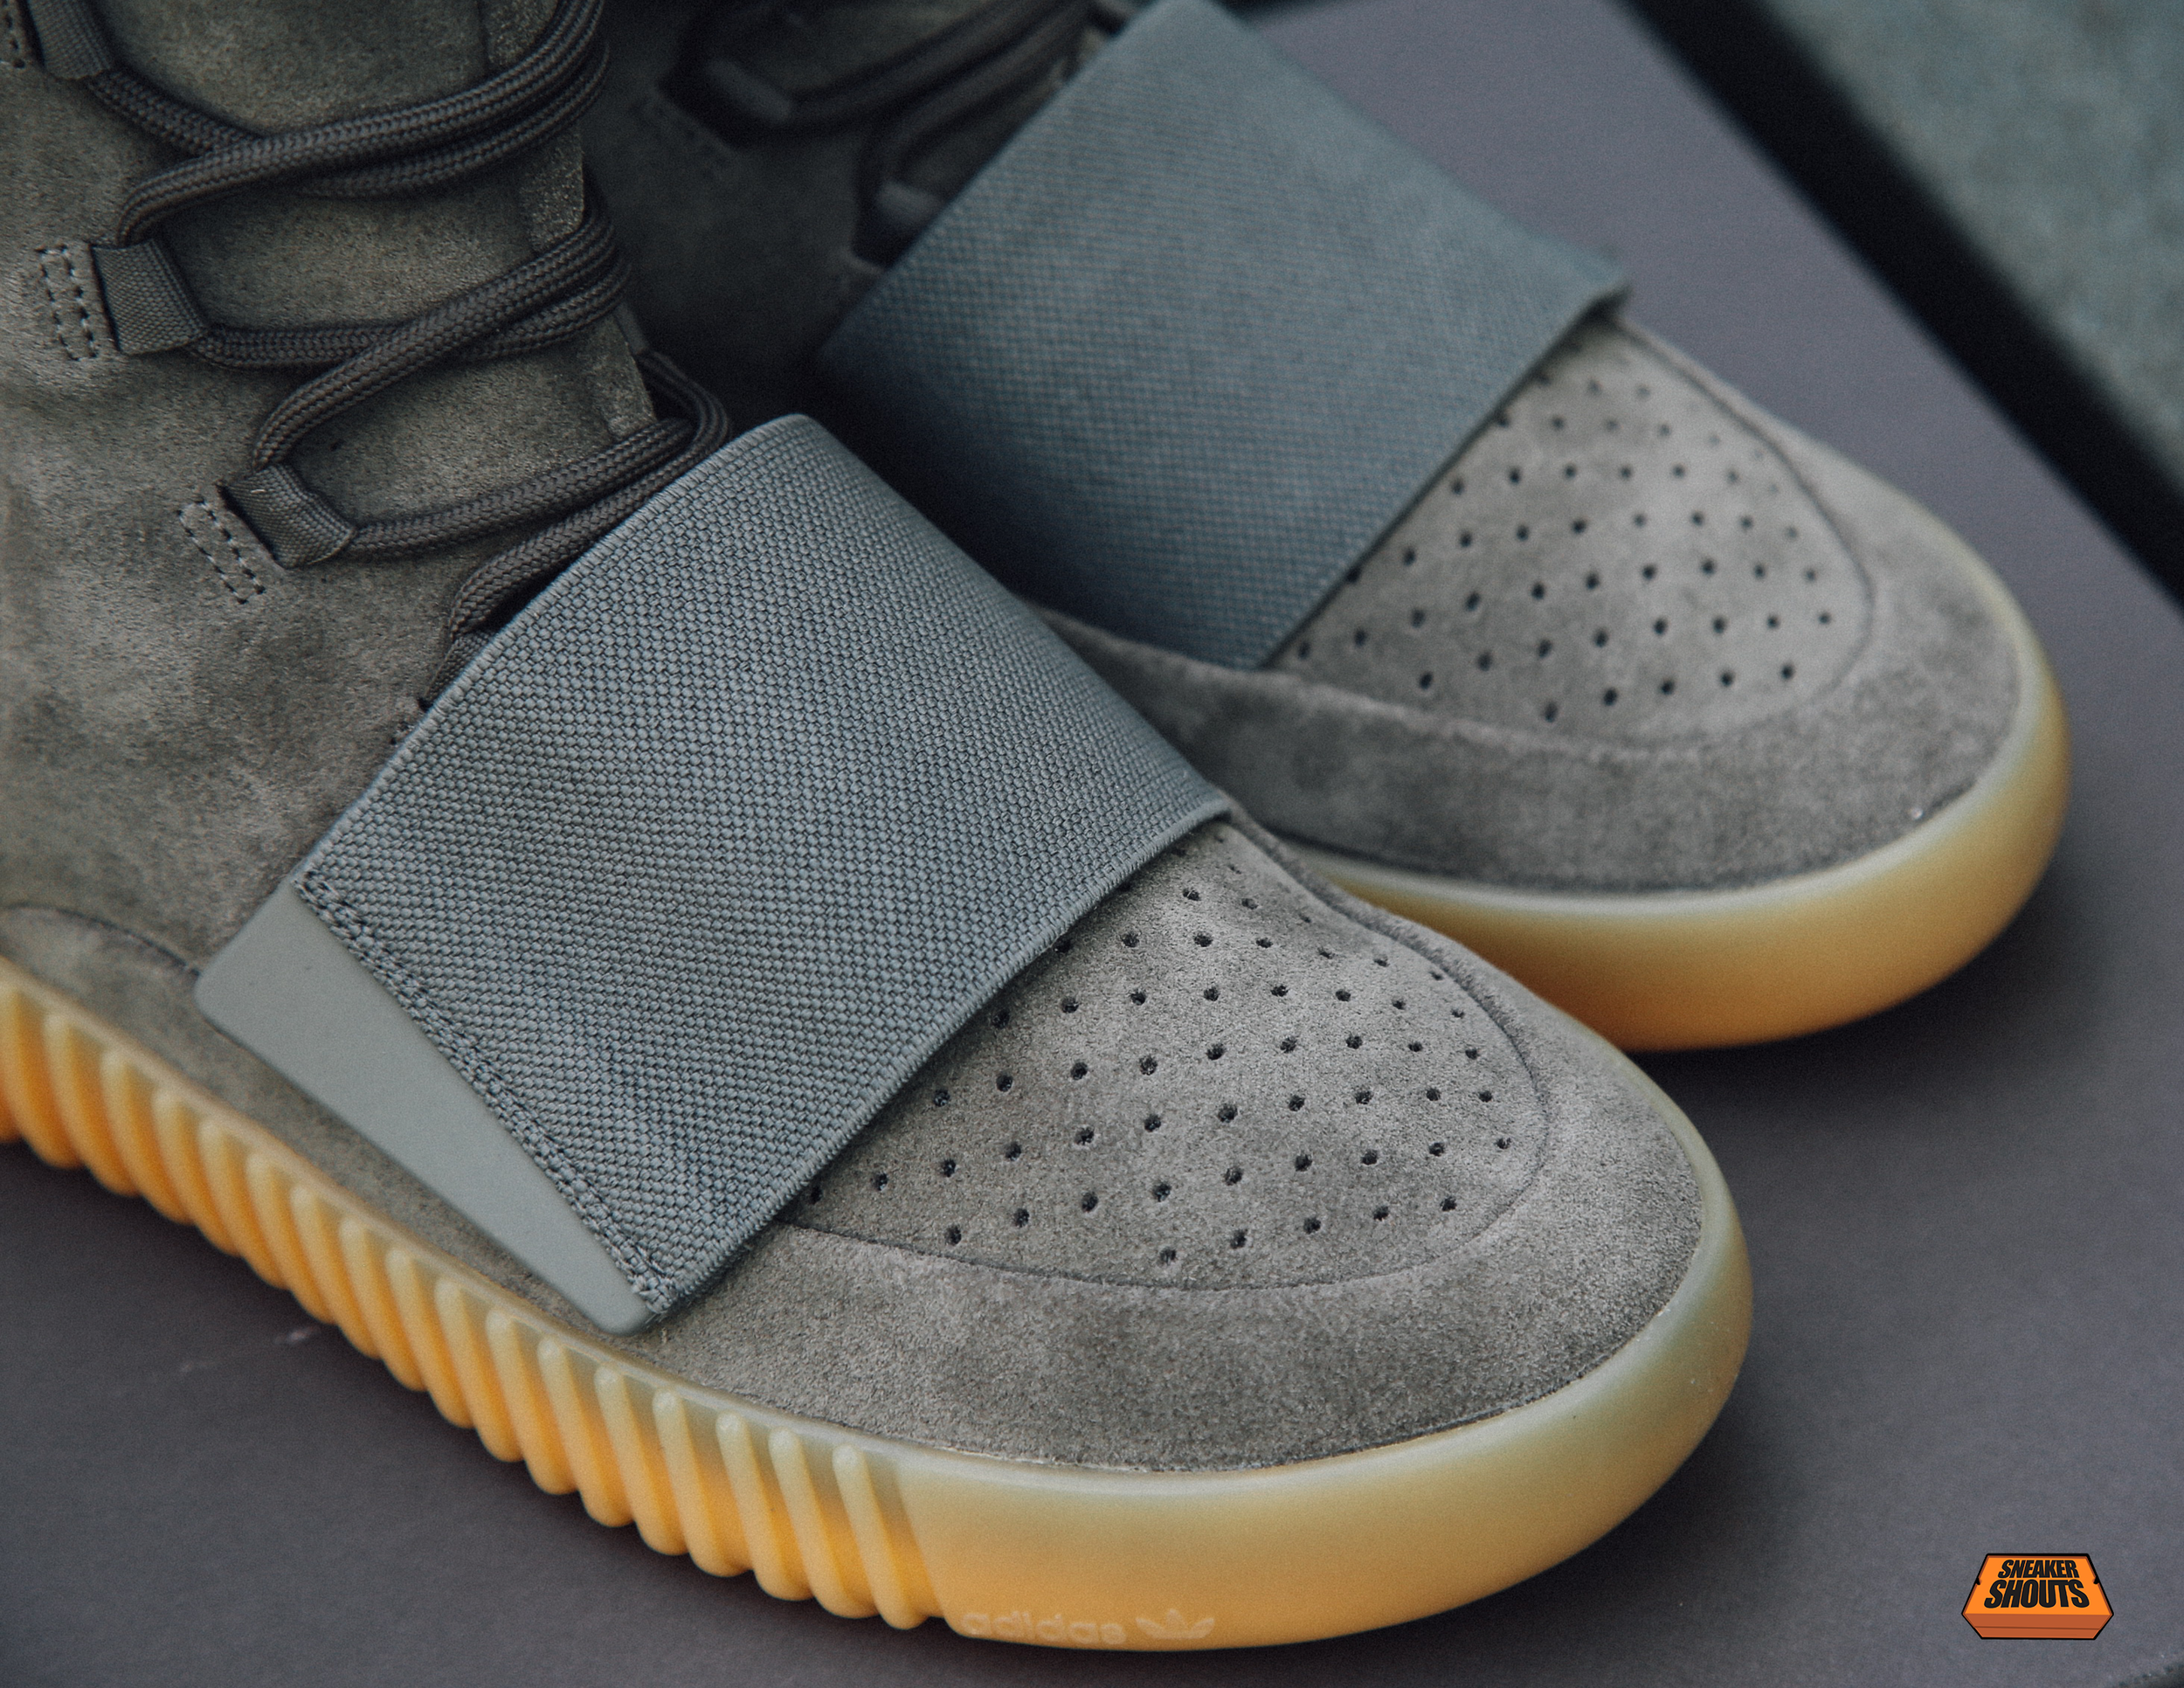 Tagged-Adidas-Yeezy-750-Boost-Light-Grey-Gum-Glow-In-The-Dark-7.png